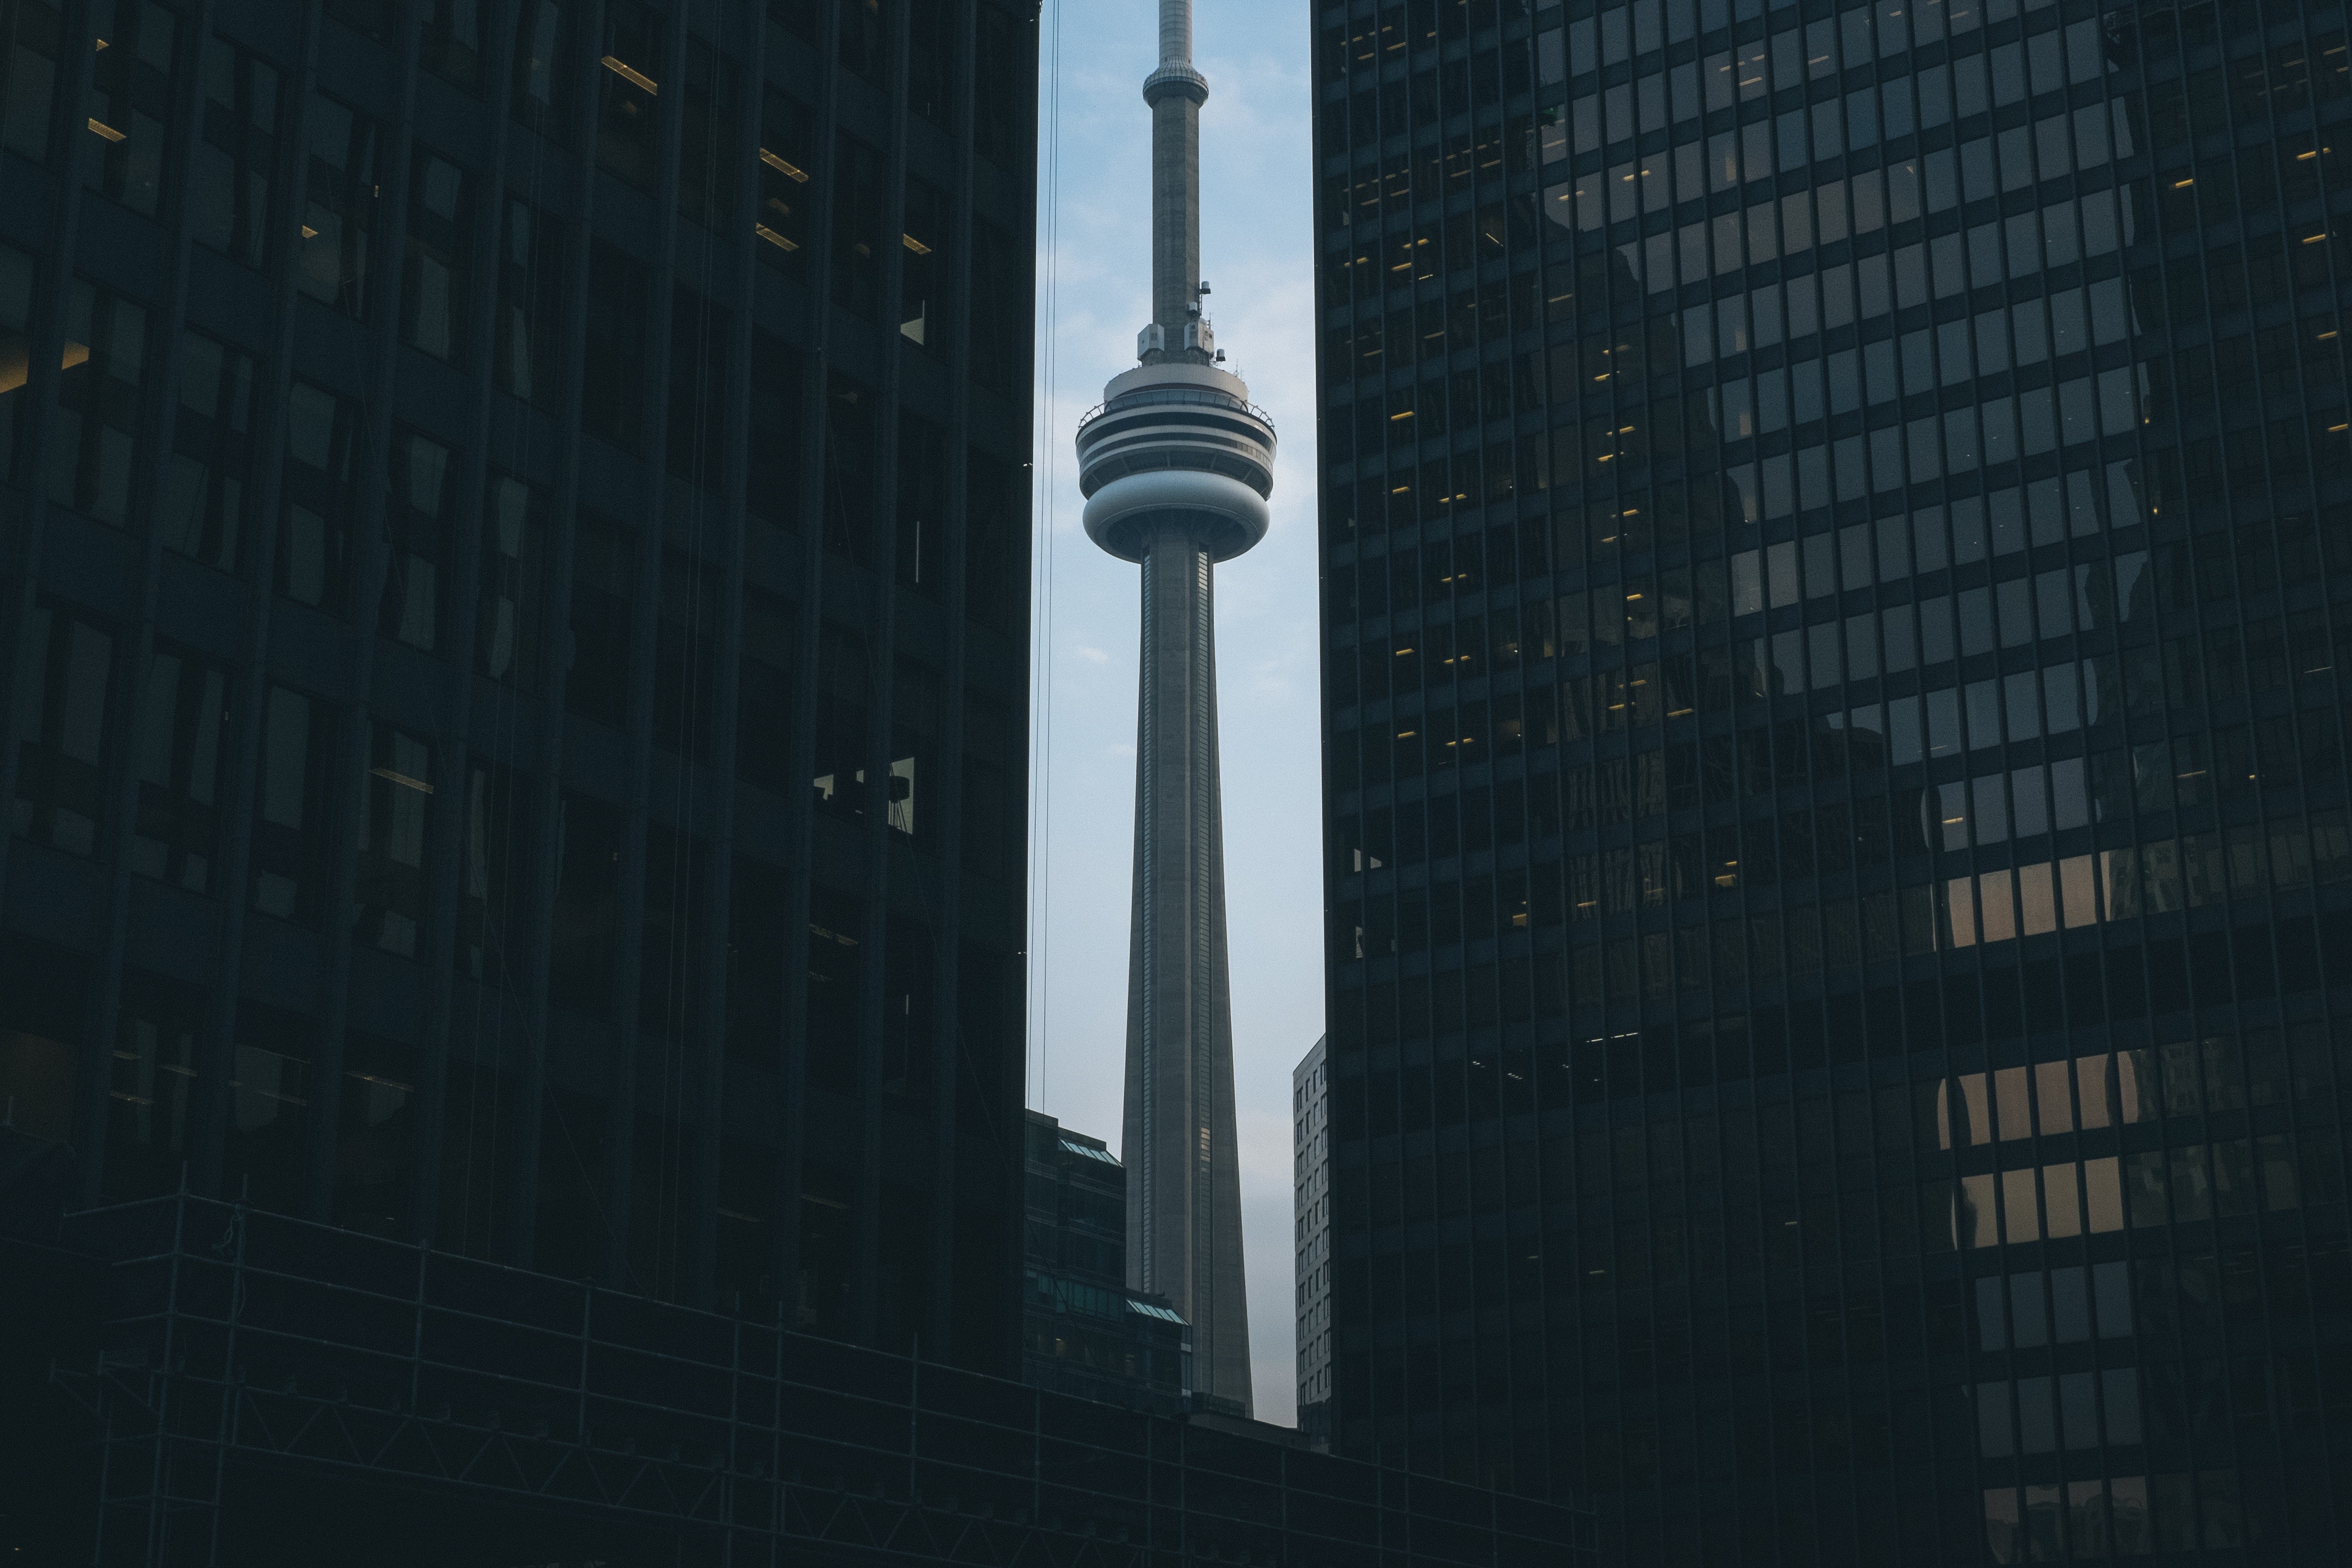 Toronto Canada Cn Tower Is The 9th Highest Free Of The World Structure High  5533 M Hd Wallpapers For Desktop Mobile Phones And Tv 3840x2400   Wallpapers13com